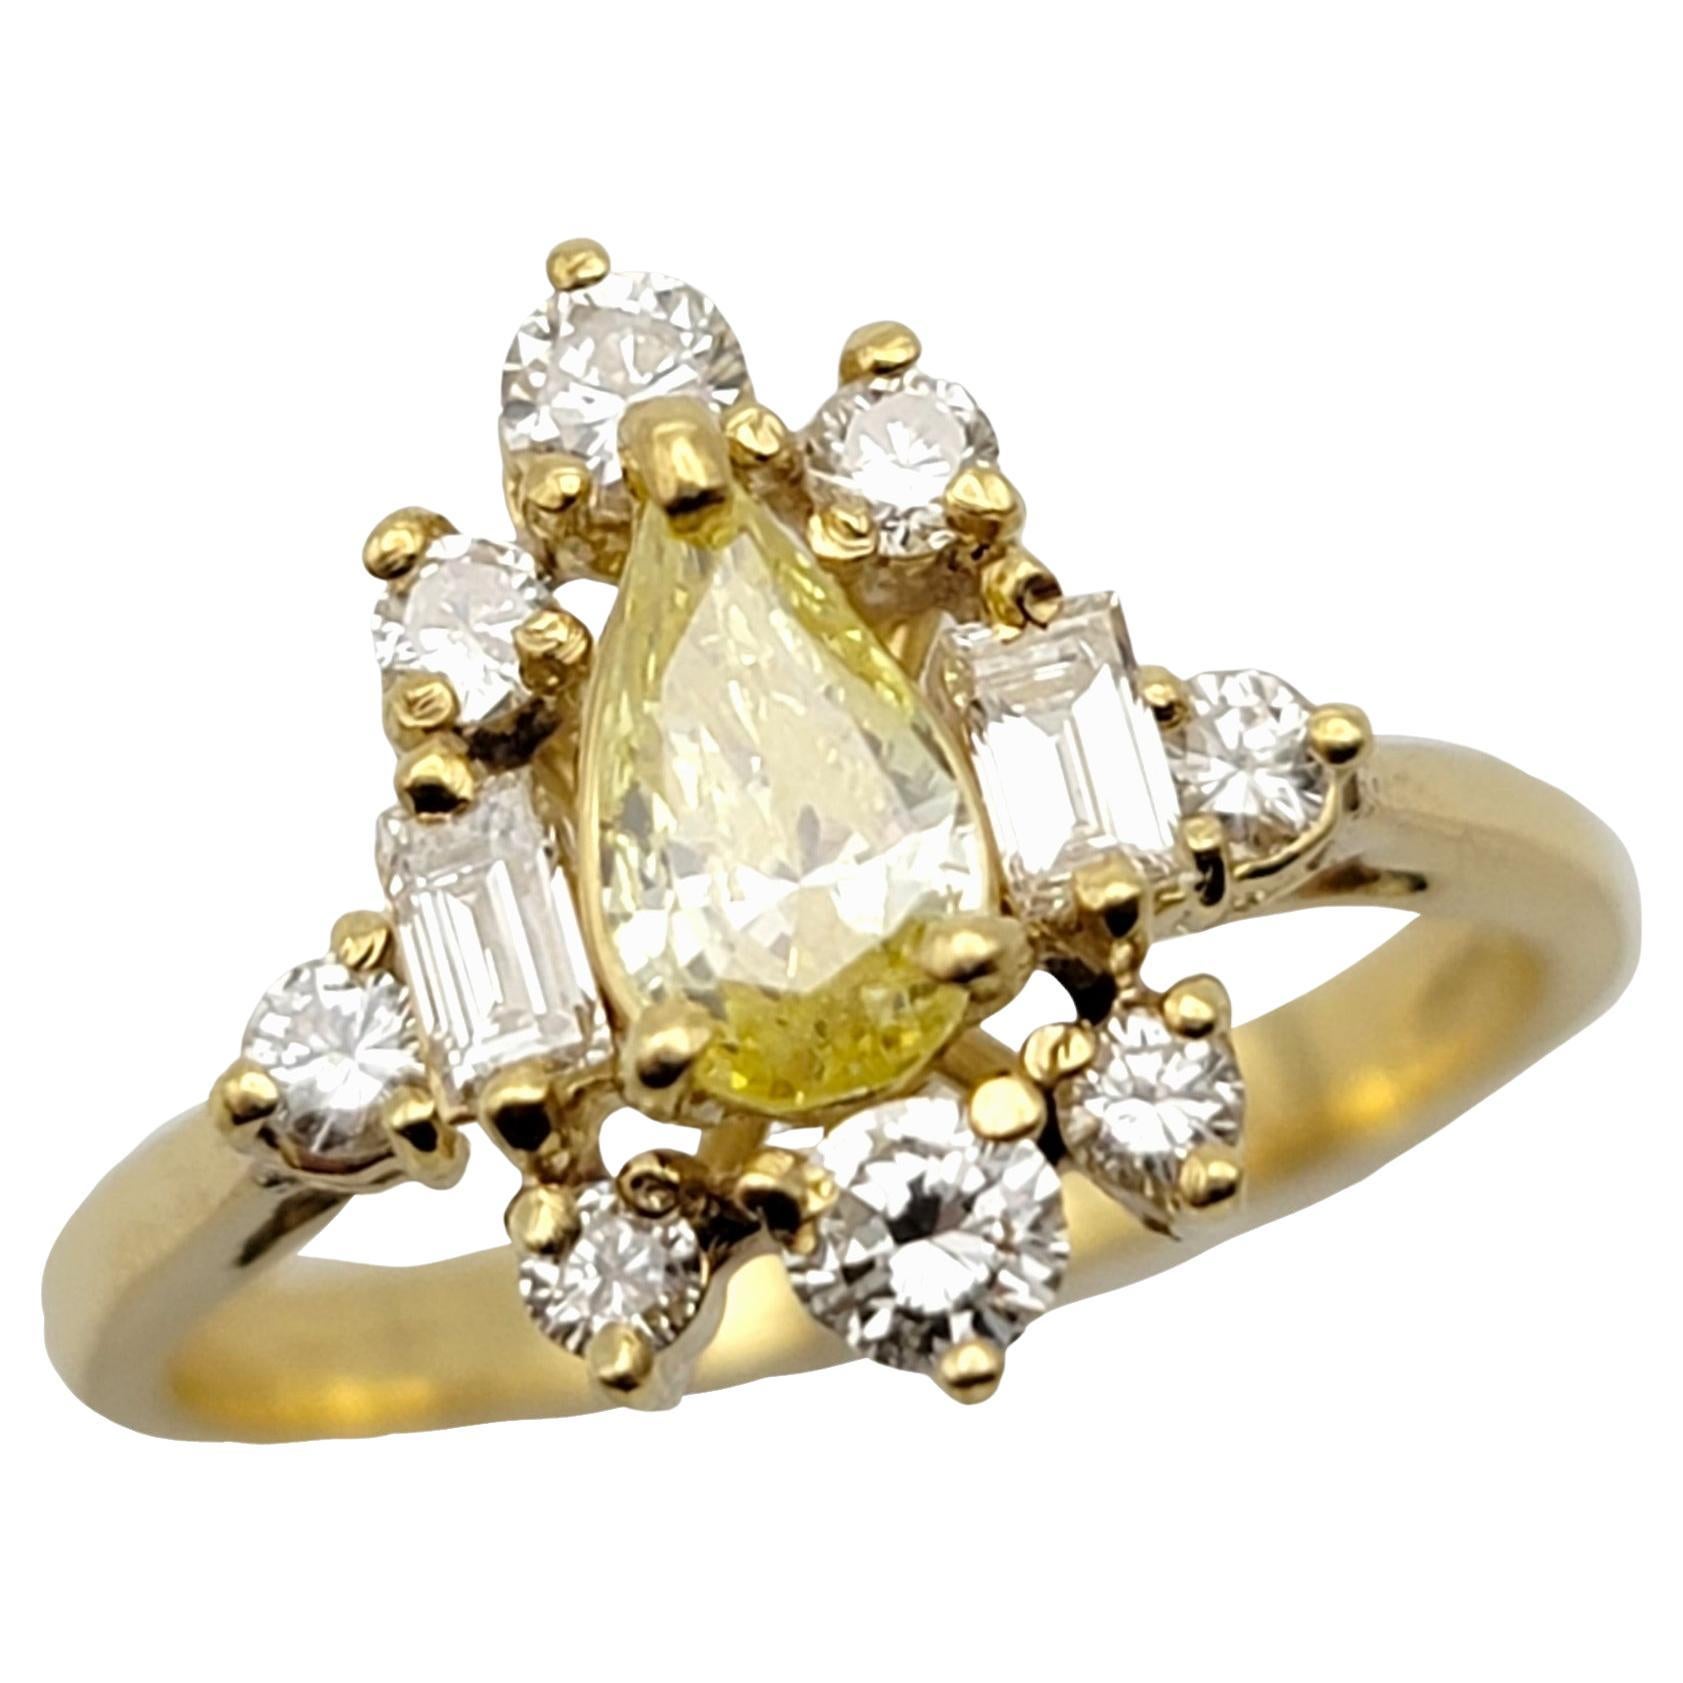 Pear Cut Fancy Yellow Diamond Ring with White Diamond Accents 18 Karat Gold Band